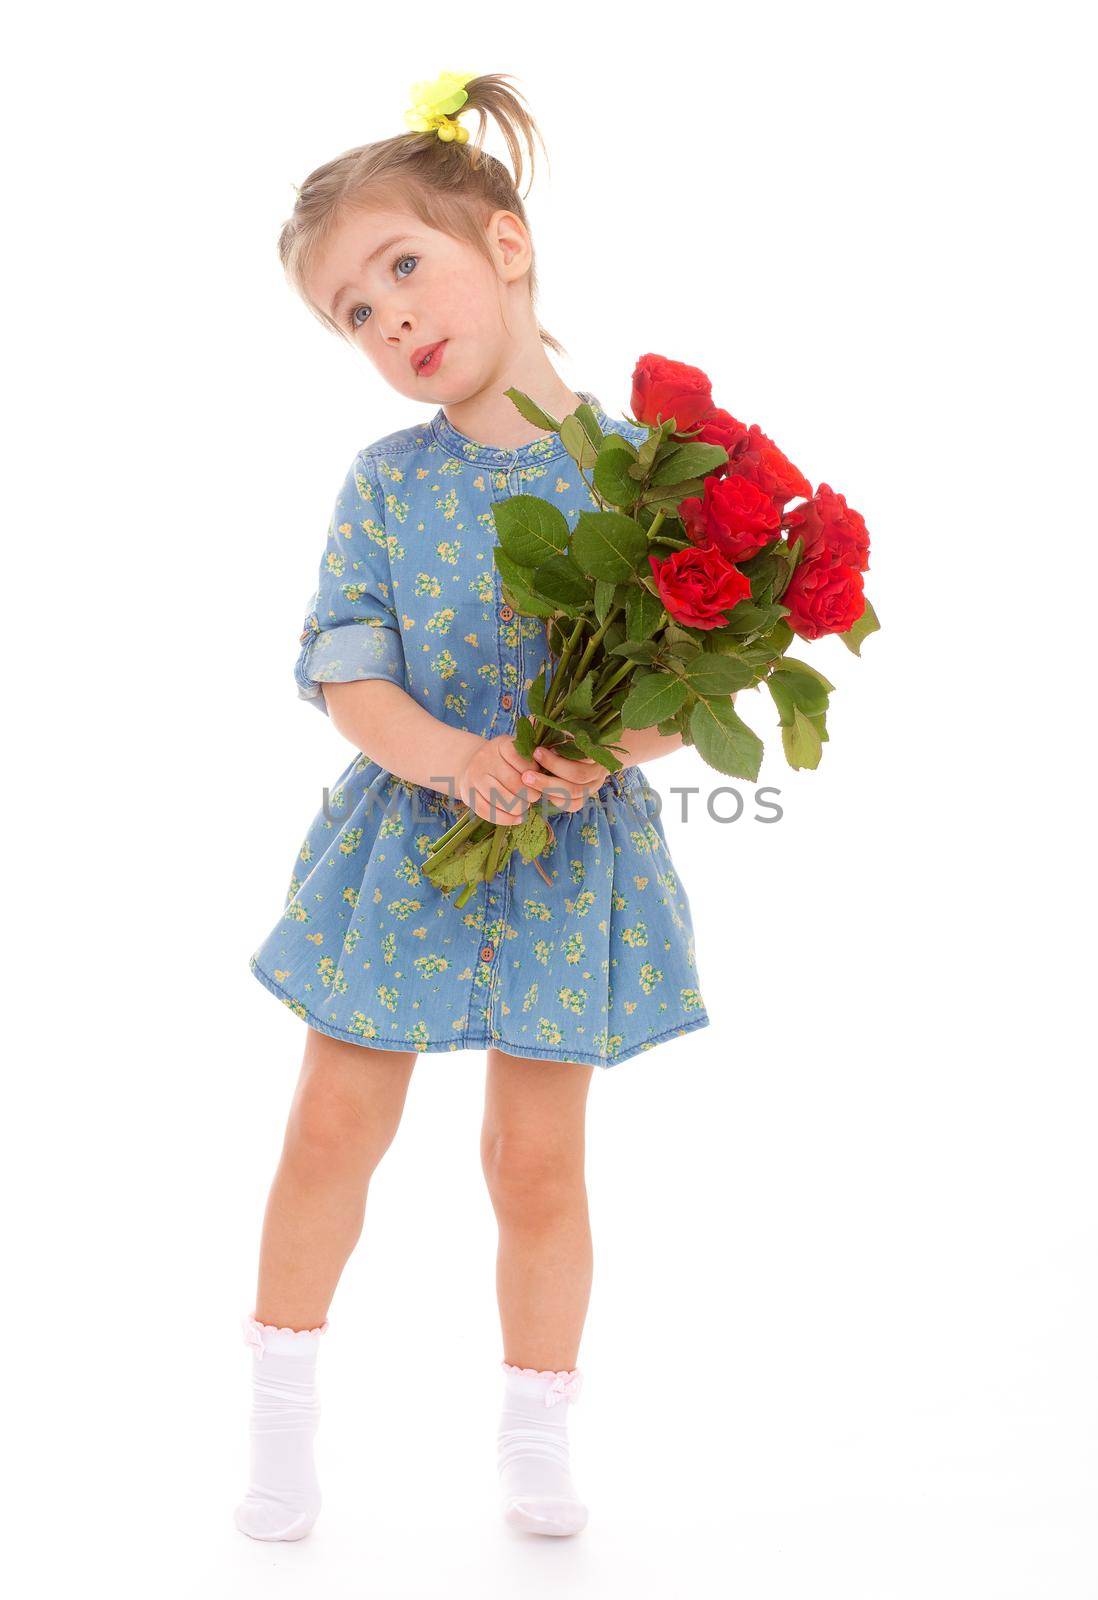 charming little girl holding a bouquet of red roses. by kolesnikov_studio